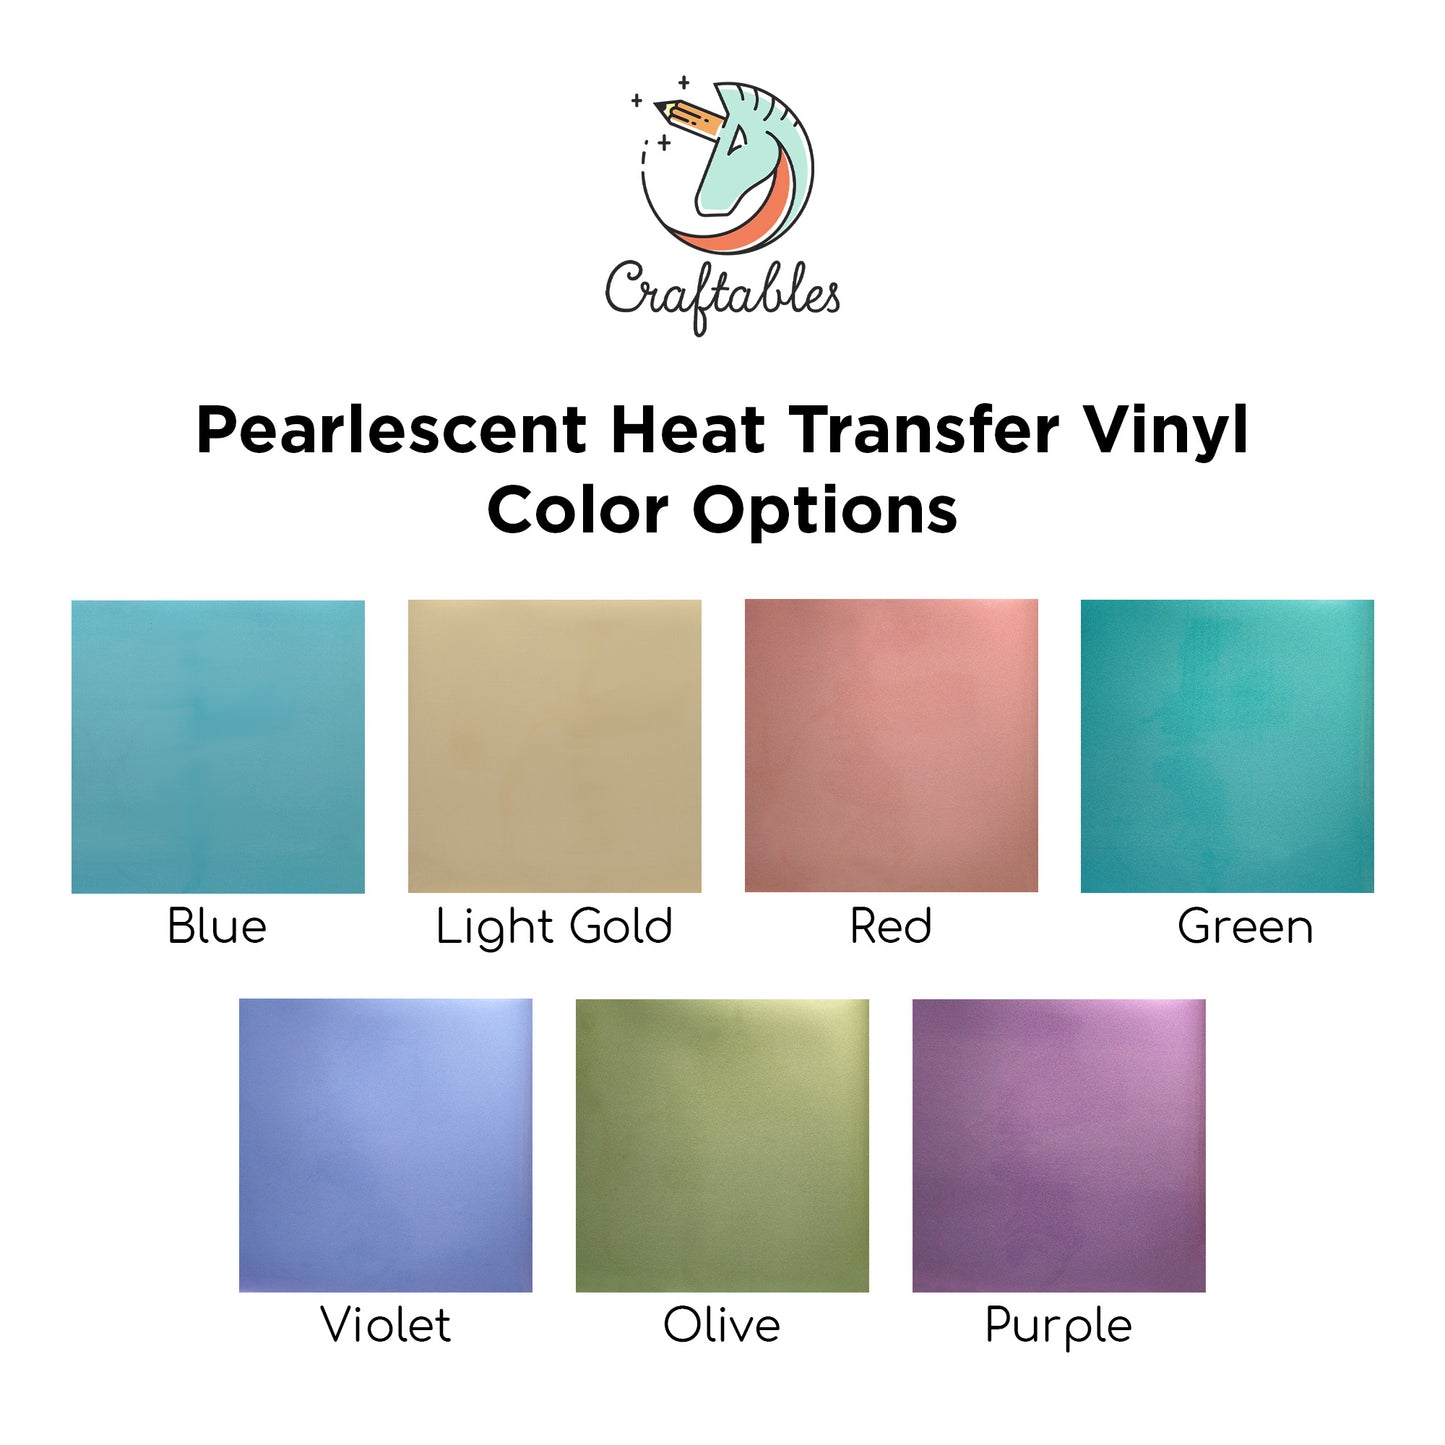 Red Pearlescent Heat Transfer Vinyl Sheets By Craftables